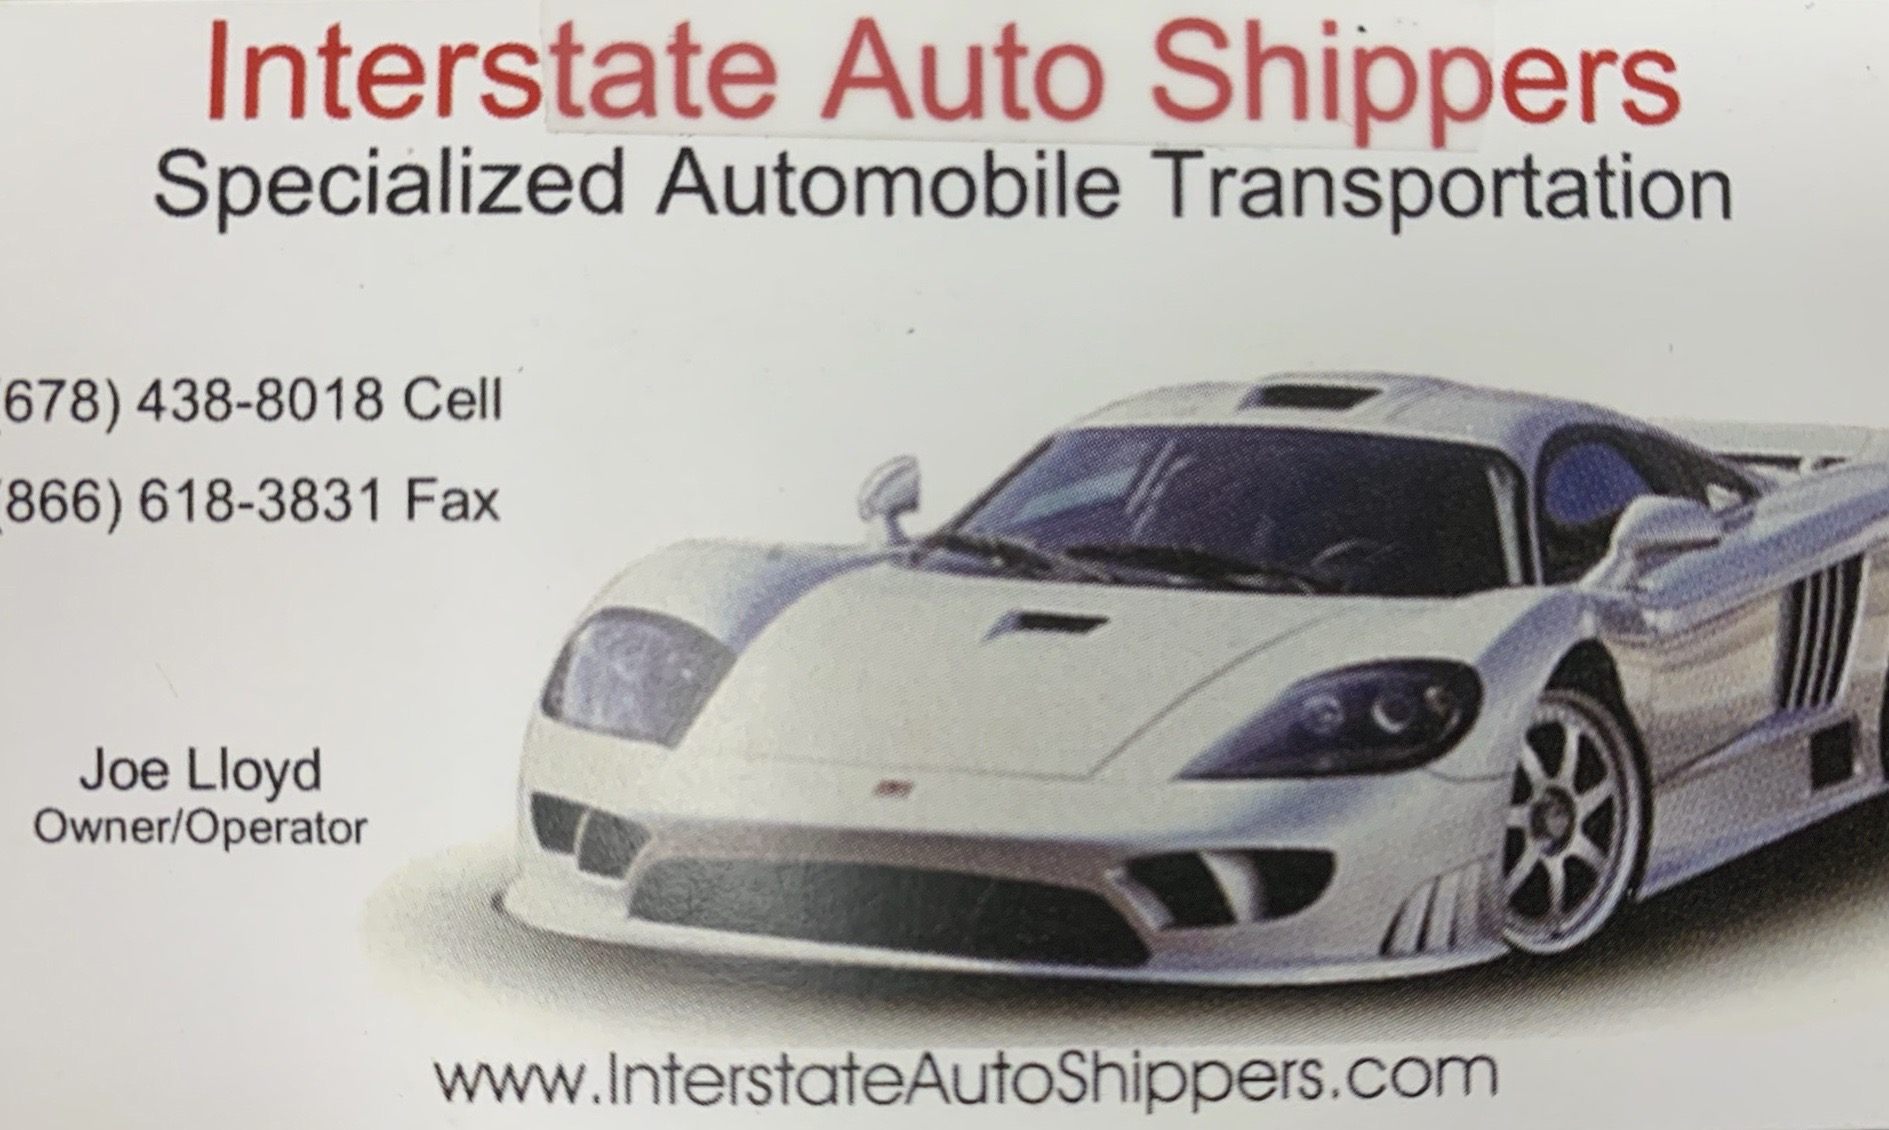 Interstate Auto Shippers. Specialized Automobile Transportation.